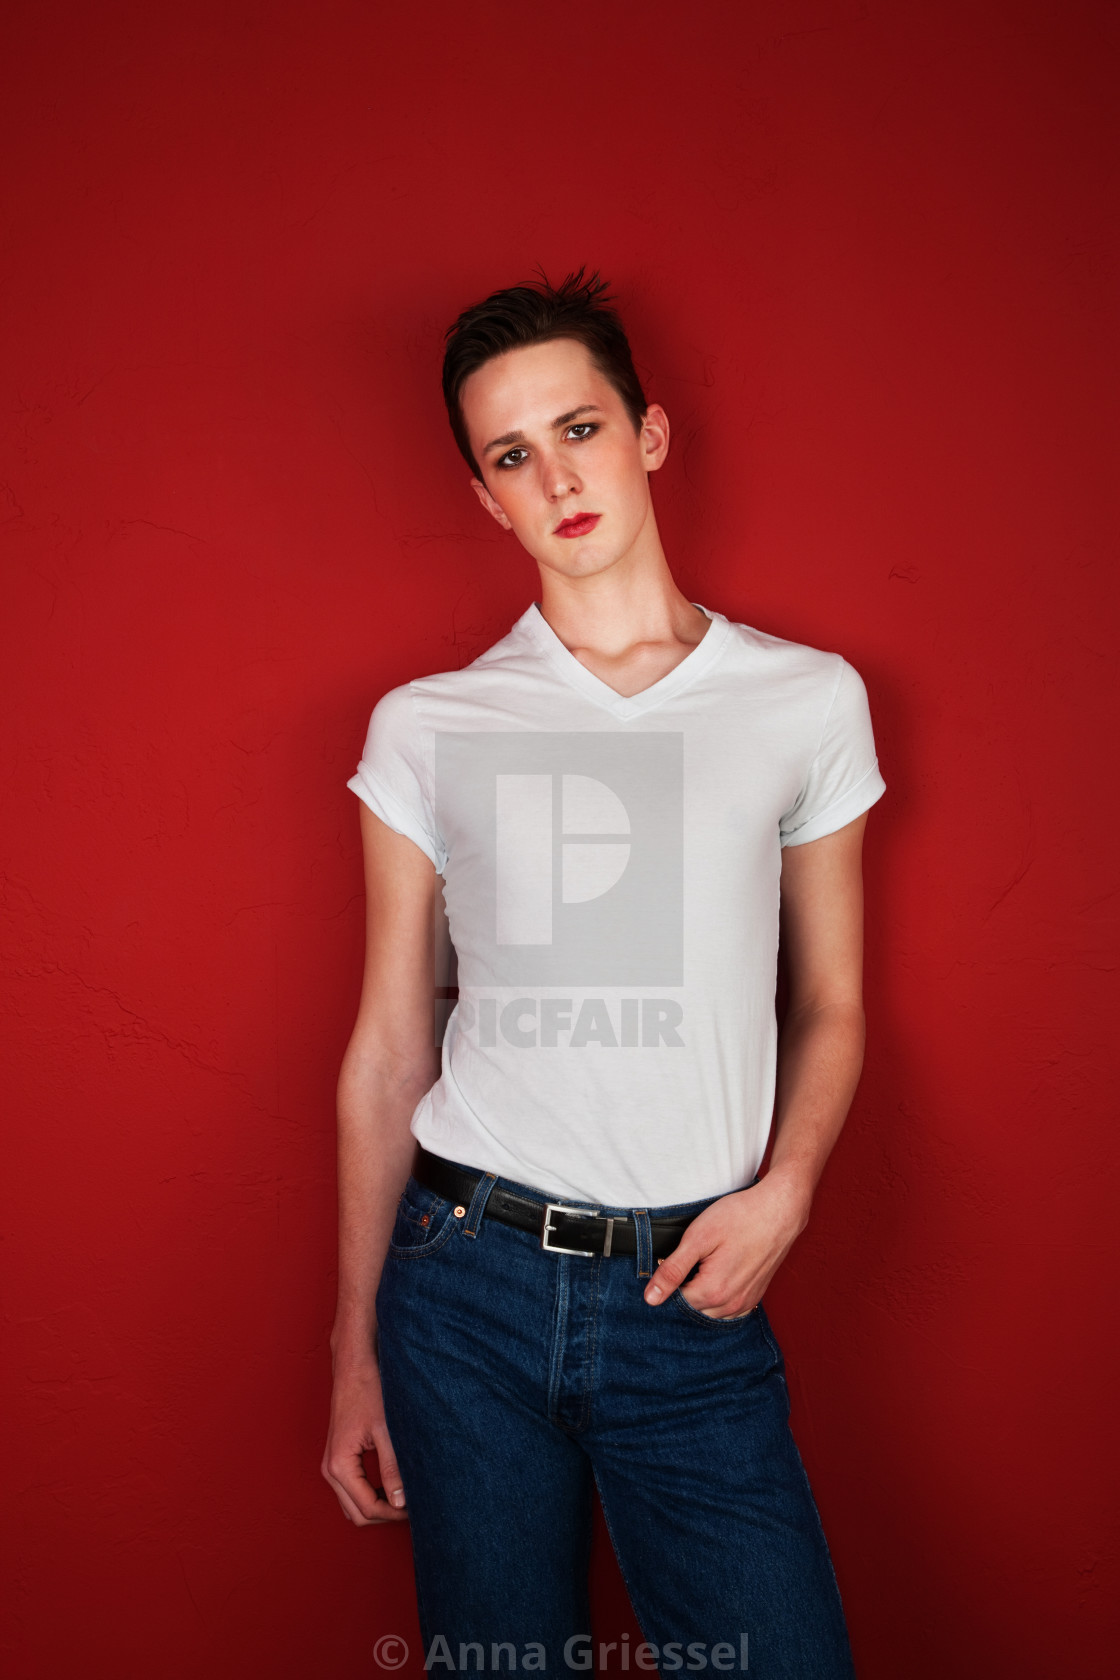 "Young Man with Hand in Pocket" stock image